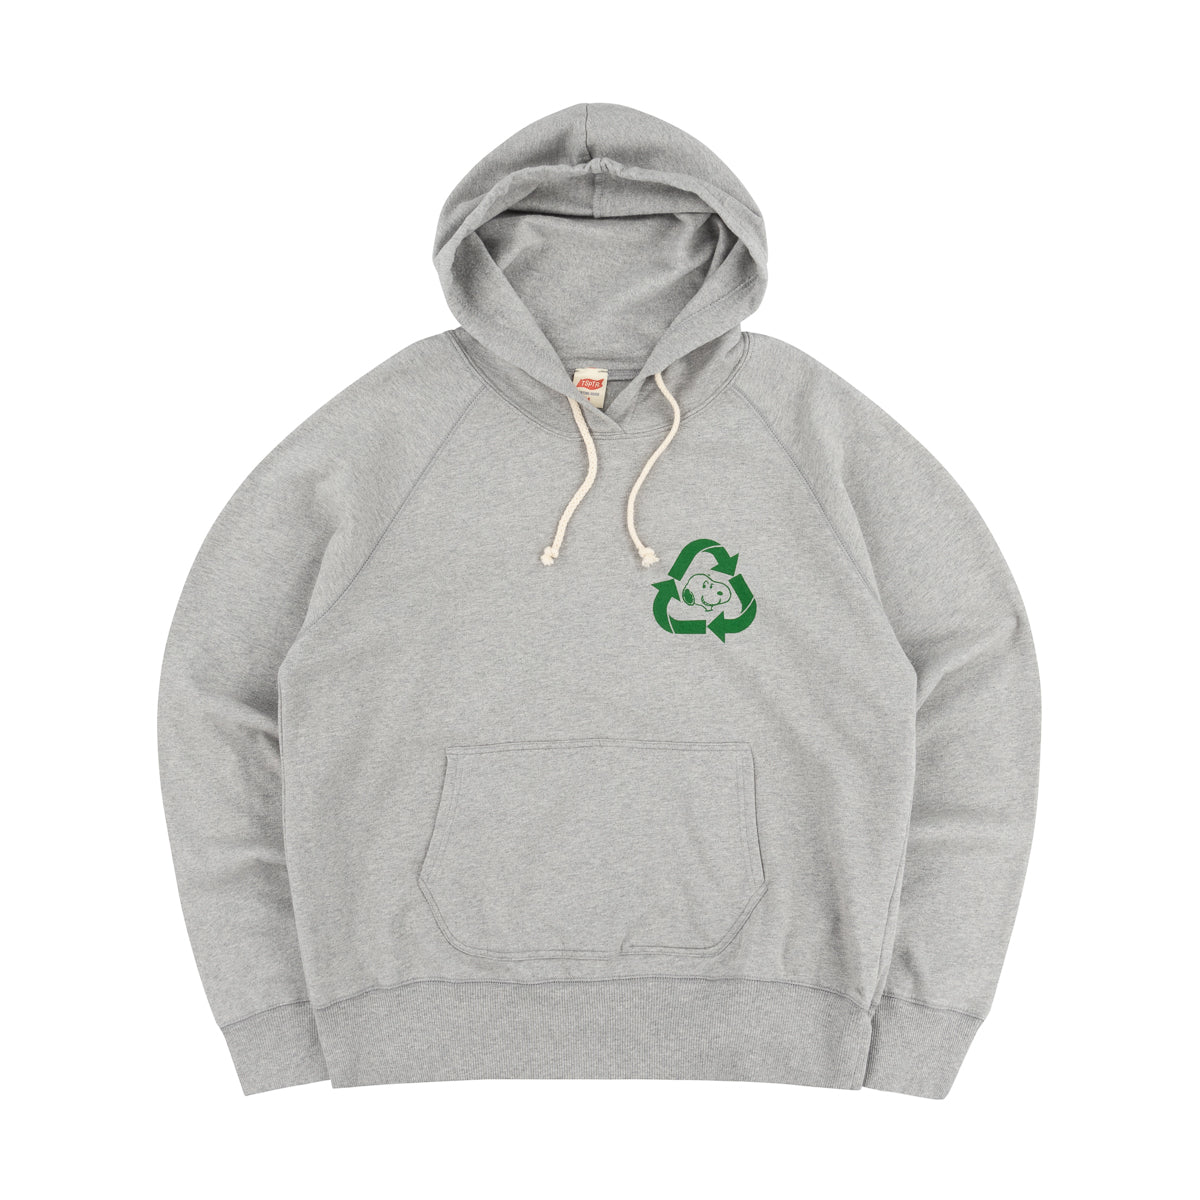 SNOOPY RECYCLE Hoody